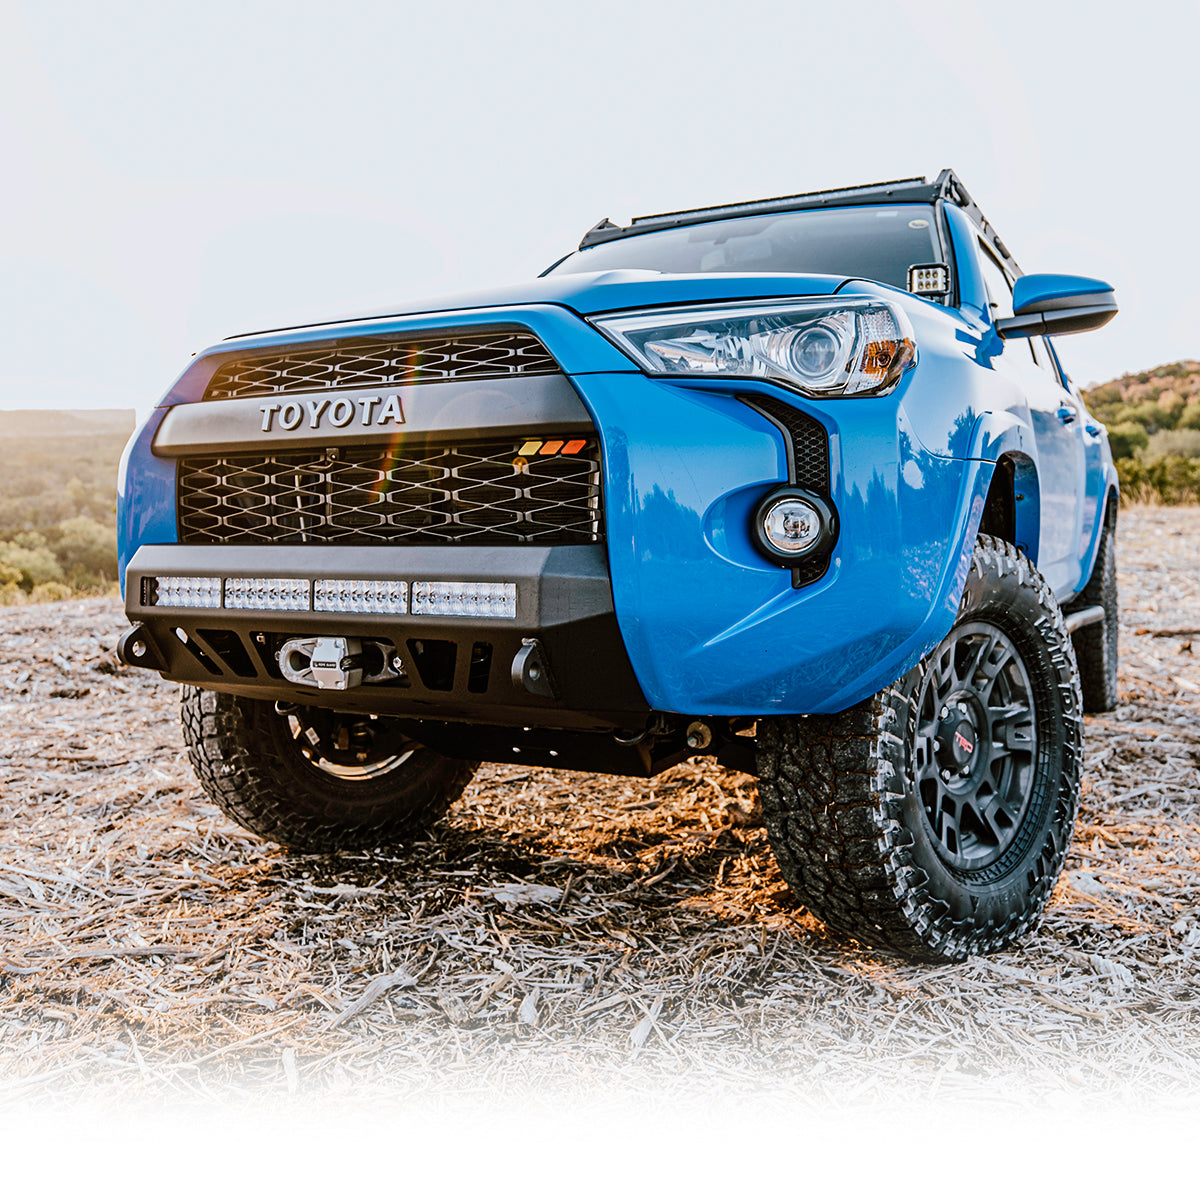 Stealth Bumper Fits 2014+ 4Runner - NO LED Bar // BUMPER LIGHT BAR - BLUE - SMALL // NO Winch // 3/4in D-Ring Shackle with Isolator - PAIR